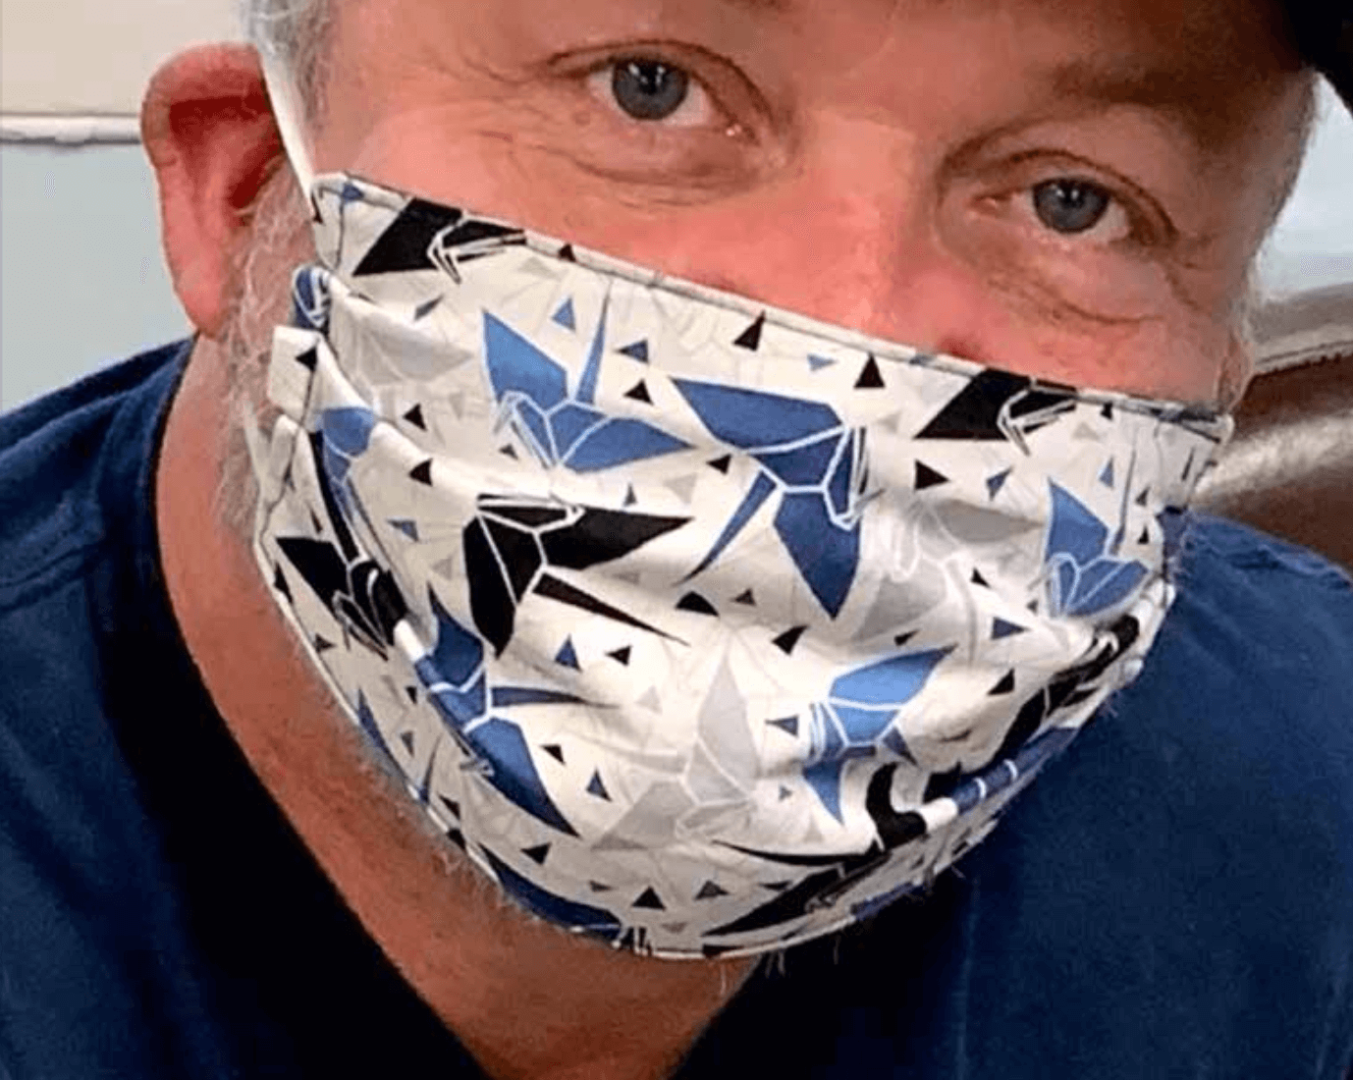 A close up image a man's face wearing a blue, white, and light blue mask. You can tell he's smiling behind the mask.